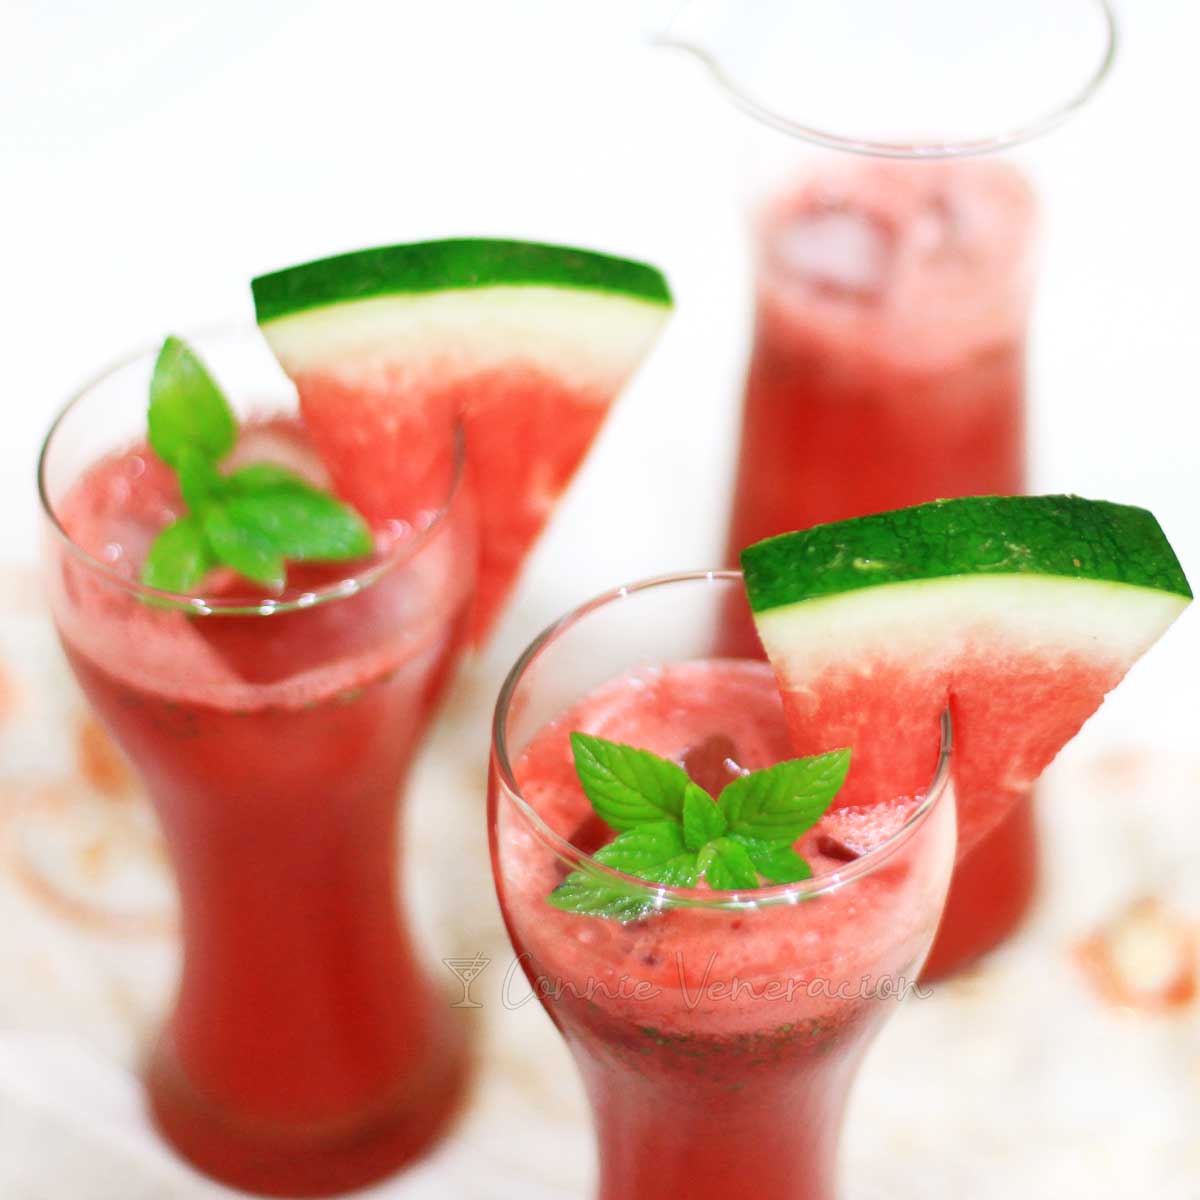 Watermelon and coconut rum cocktail garnished with mint leaves